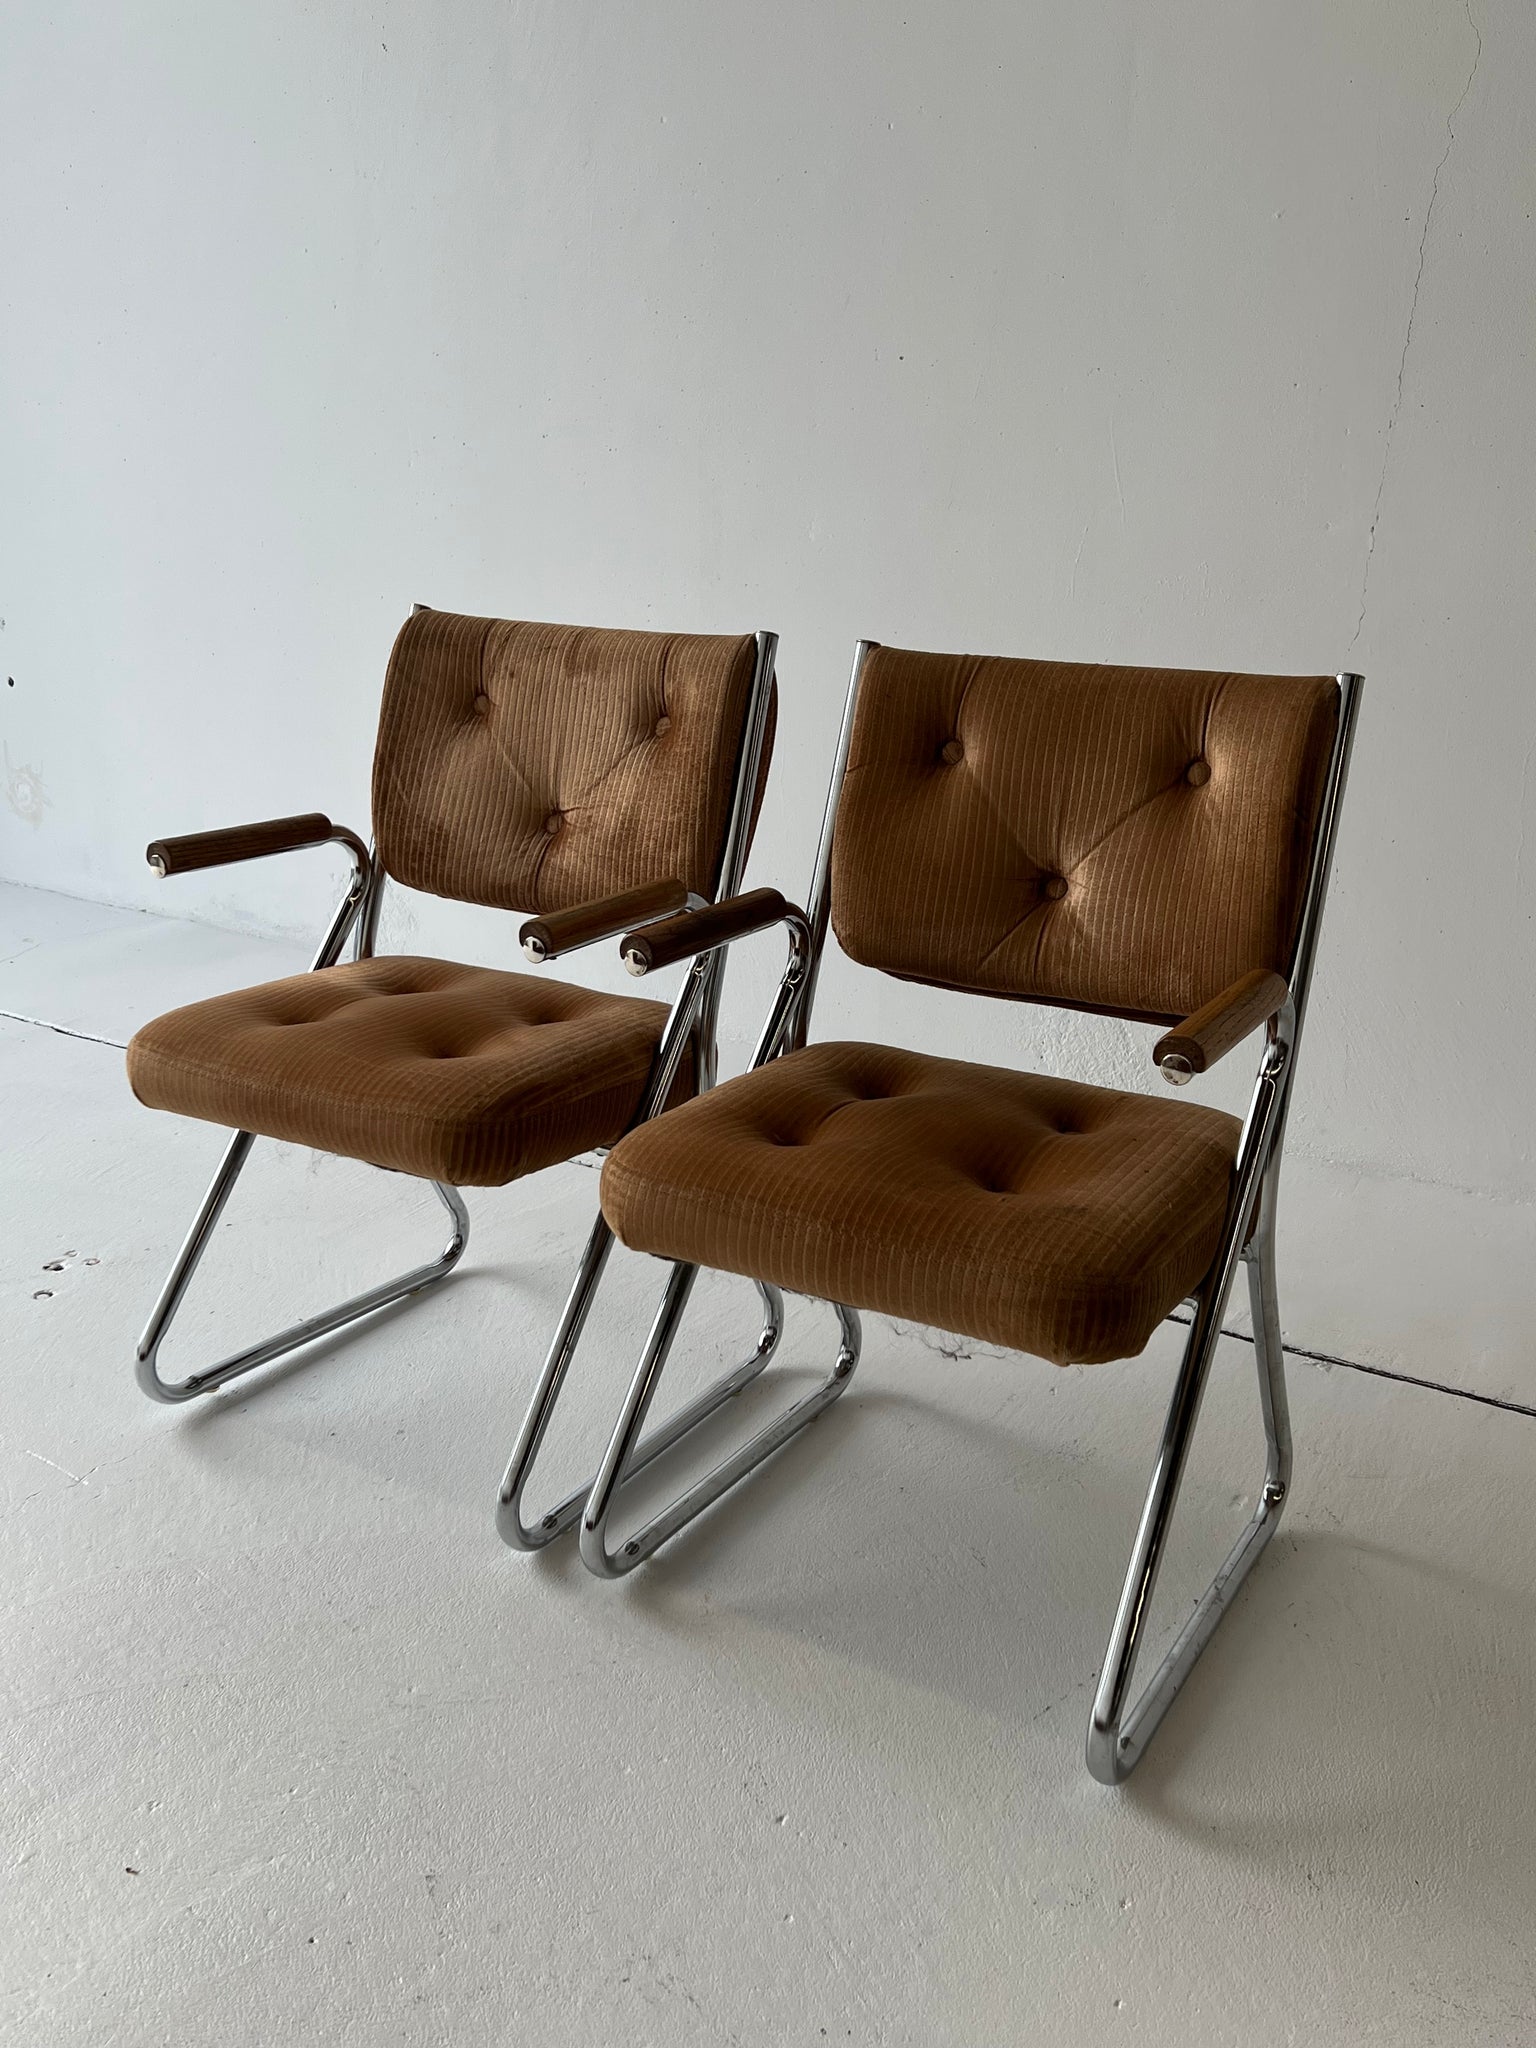 1970s Chrome Arm Chairs by Douglas Furniture